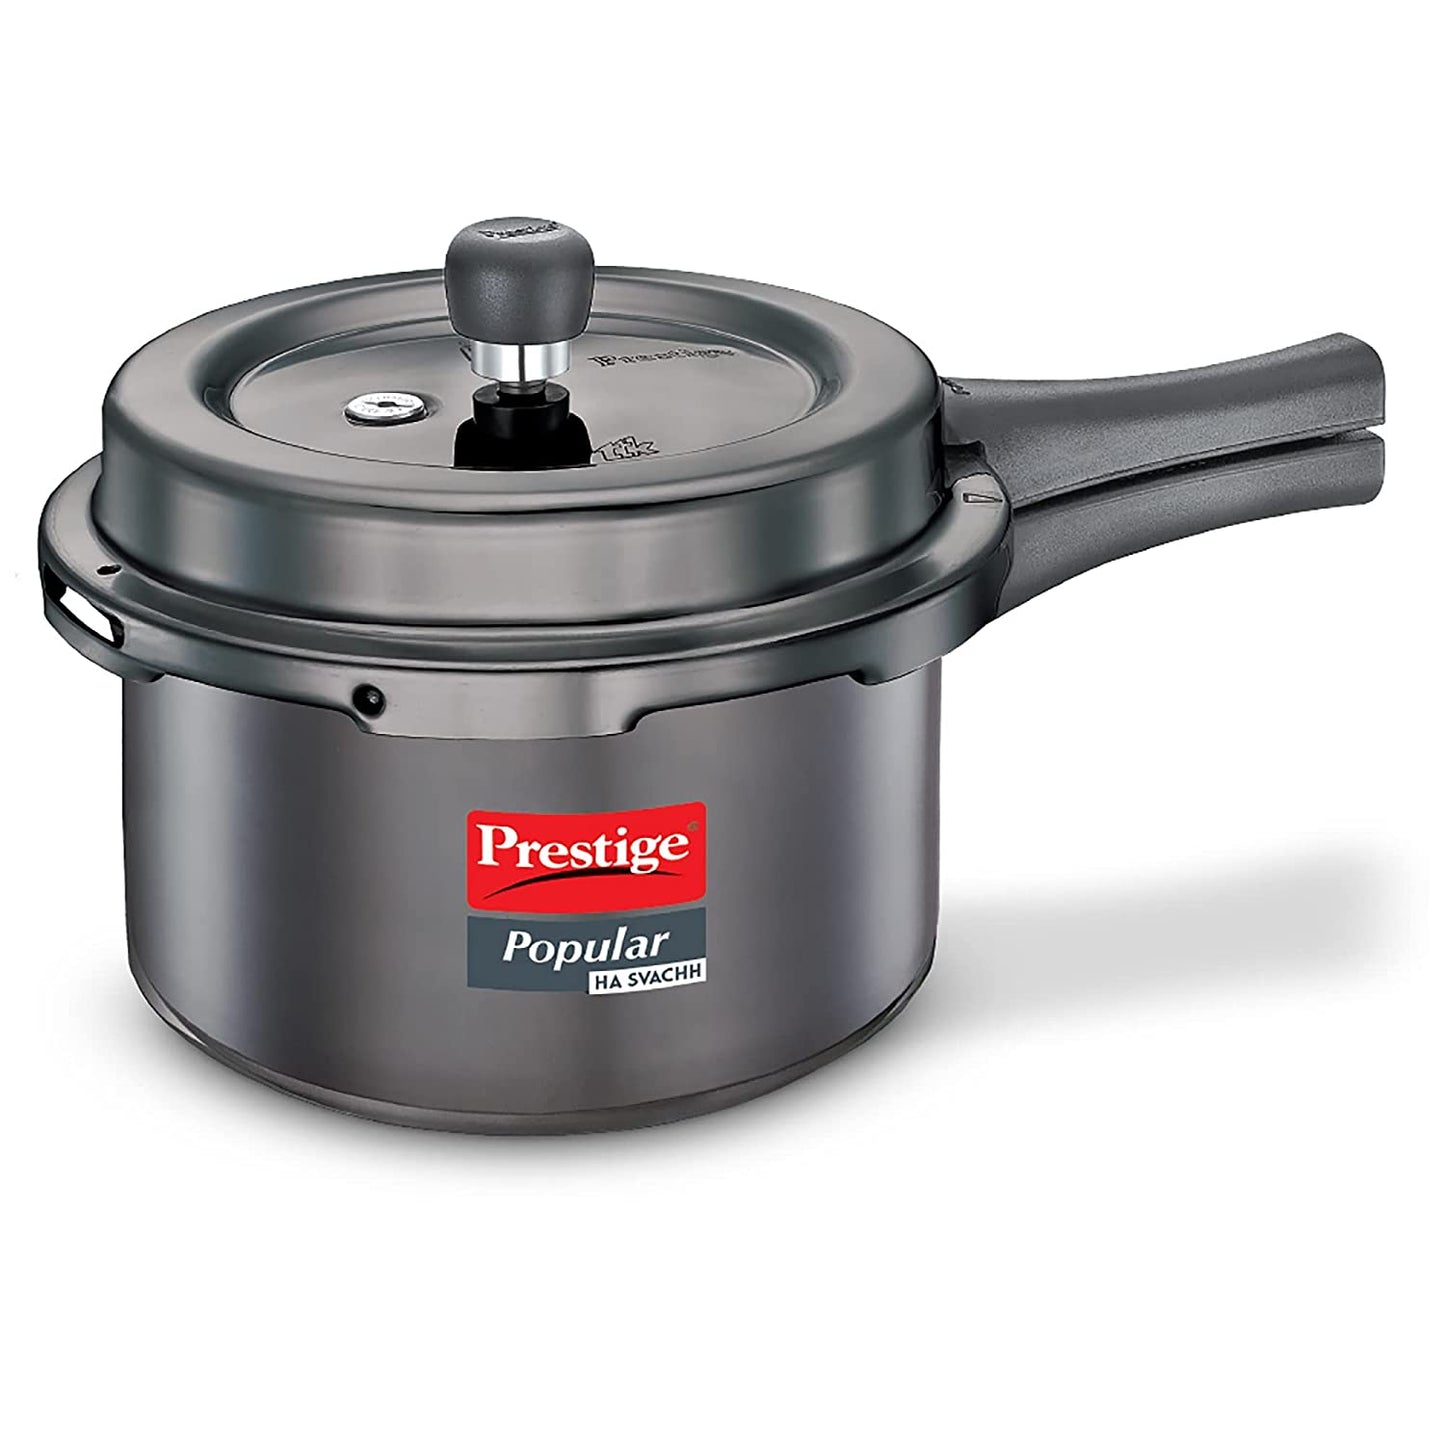 Prestige Popular Svachh Hard Anodised Aluminium Induction Base Outer Lid Pressure Cooker, 3 Litres